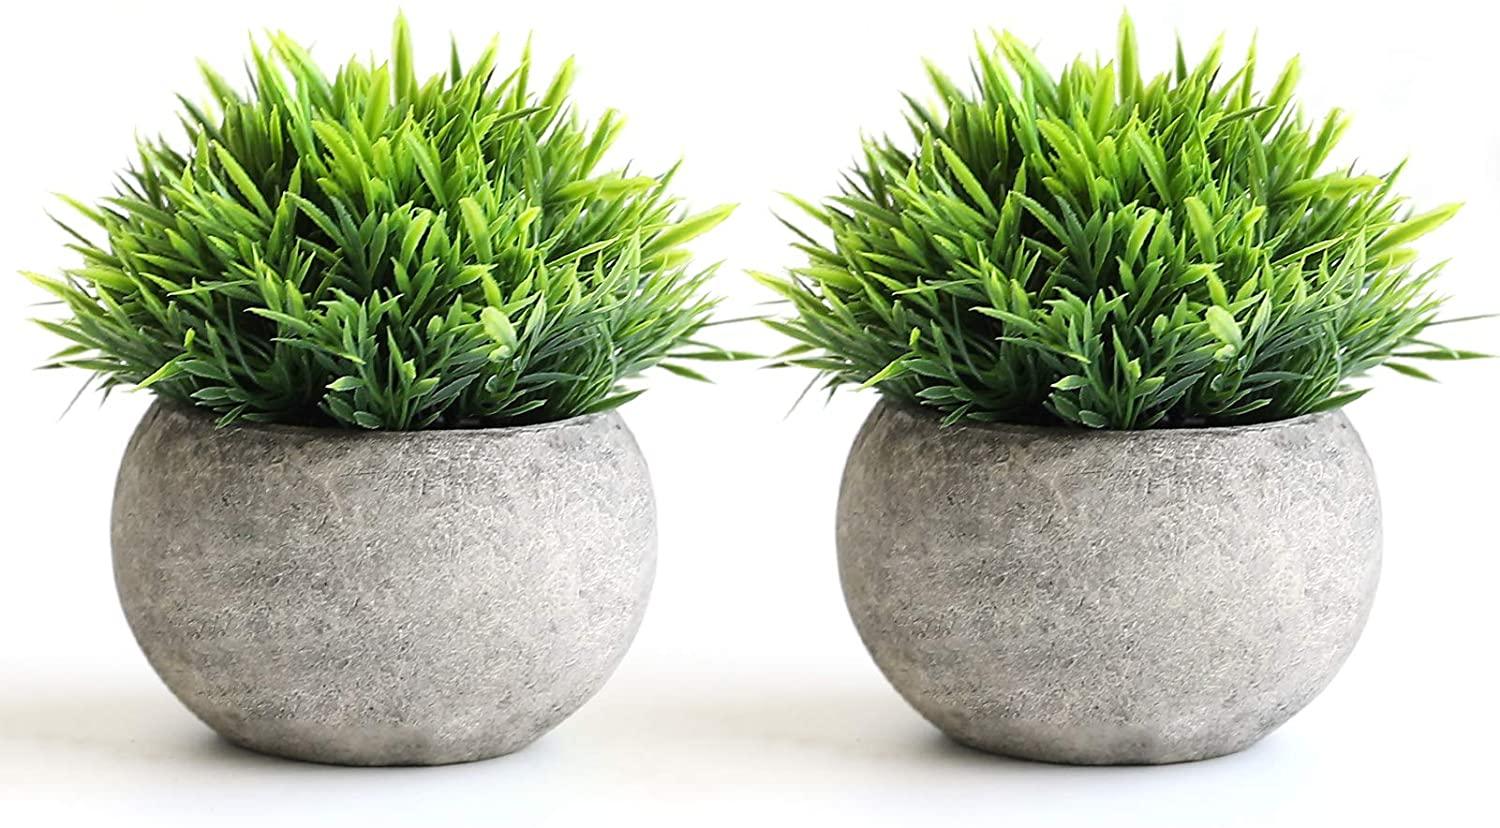 2 Pcs Fake Plants for Bathroom/Home Office Decor, Small Artificial Faux Greenery for House Decorations (Potted Plants) - If you say i do